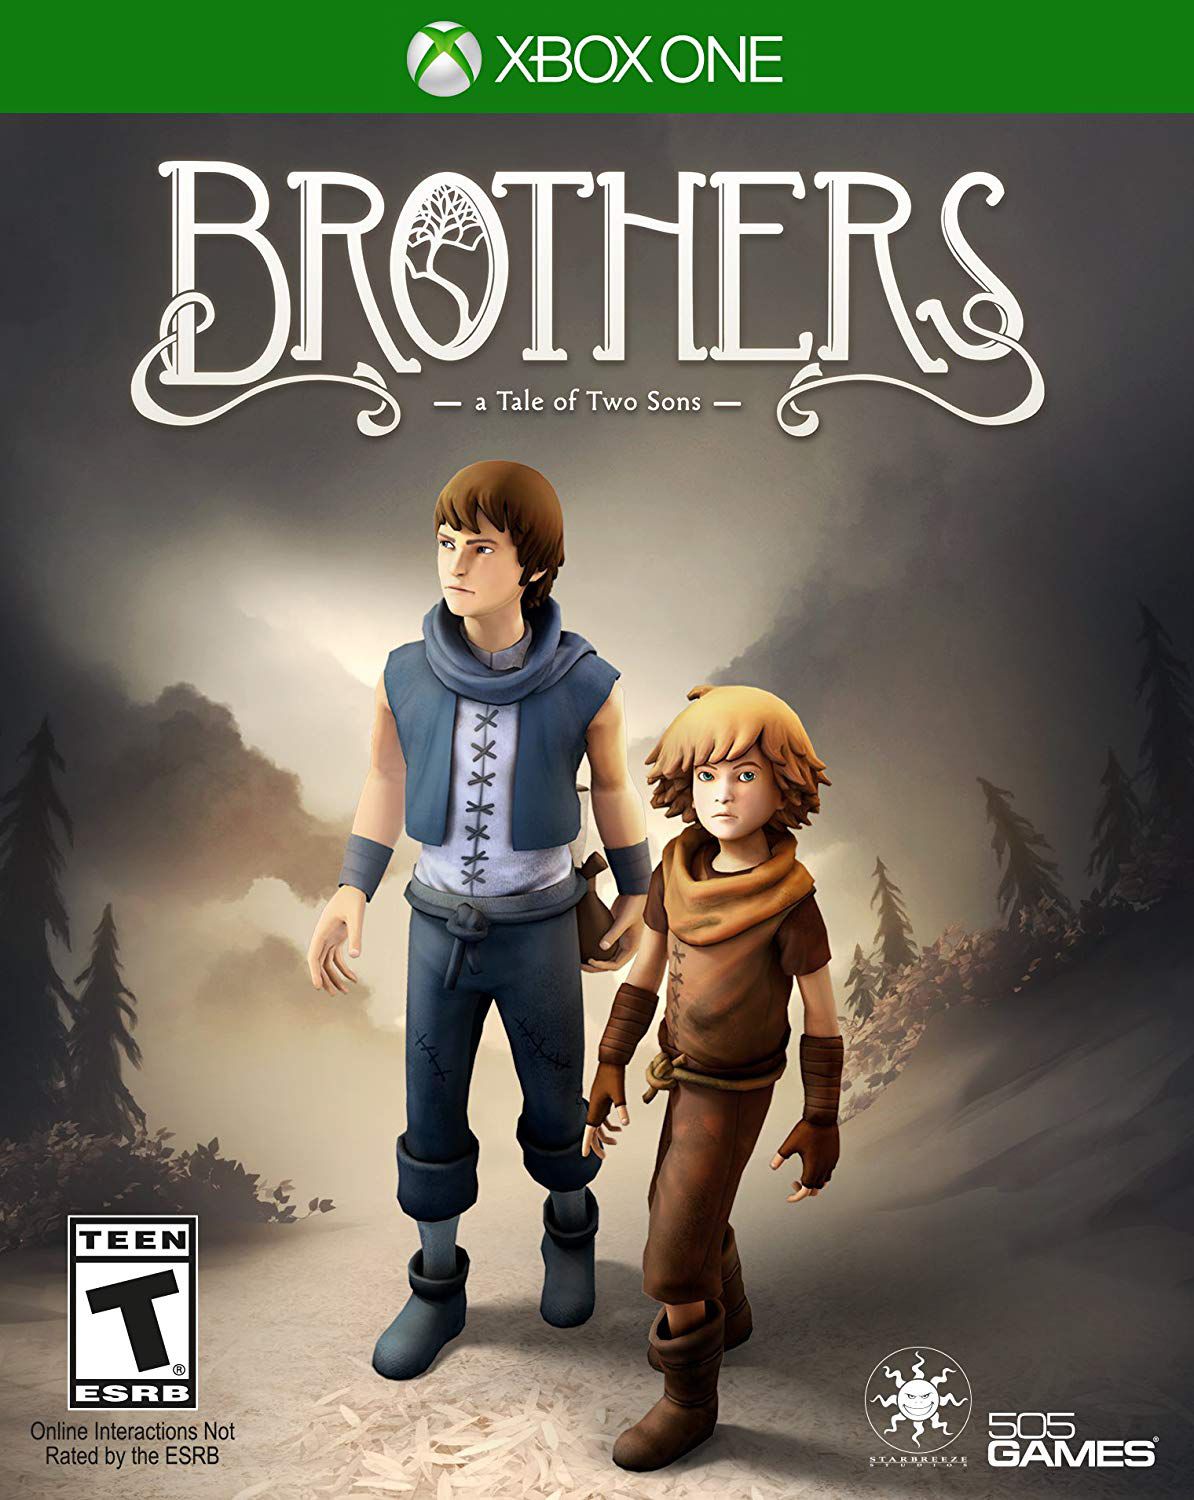 Brothers A Tale of Two Sons - Xbox One - Game Games - Loja de Games Online